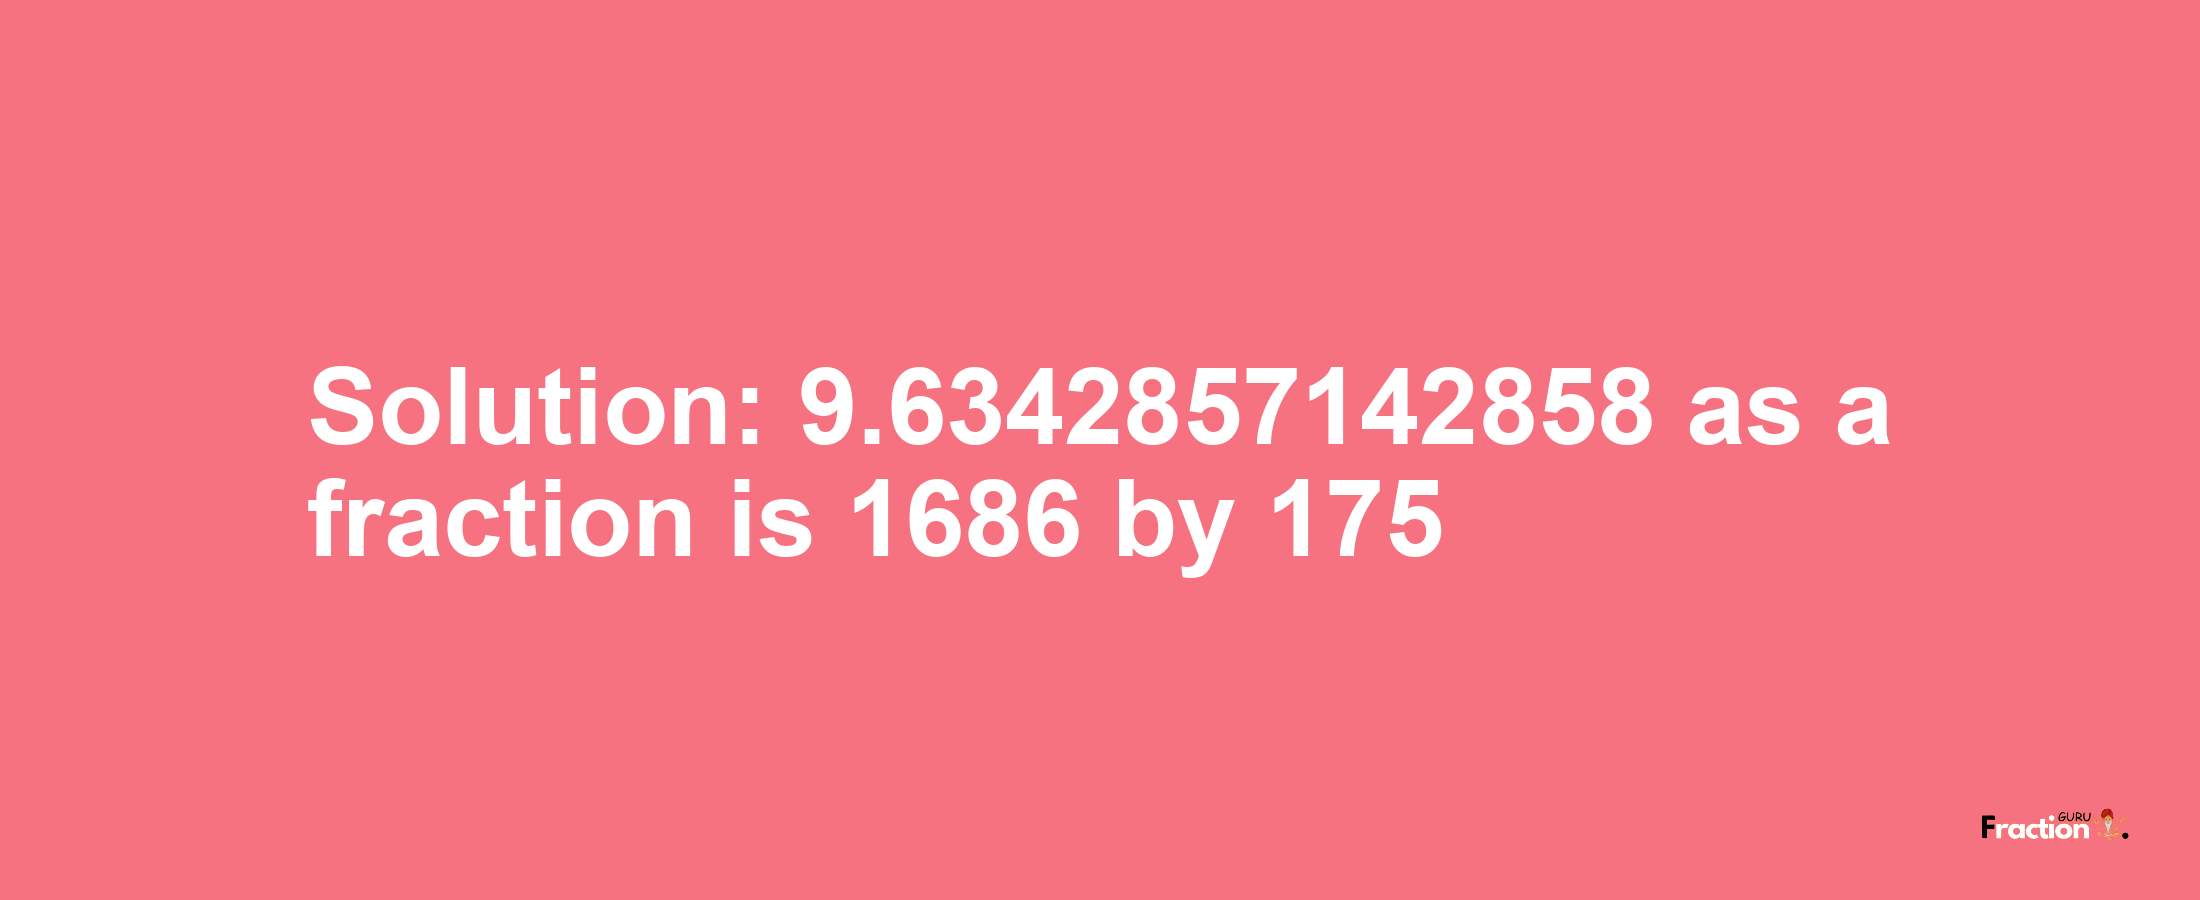 Solution:9.6342857142858 as a fraction is 1686/175